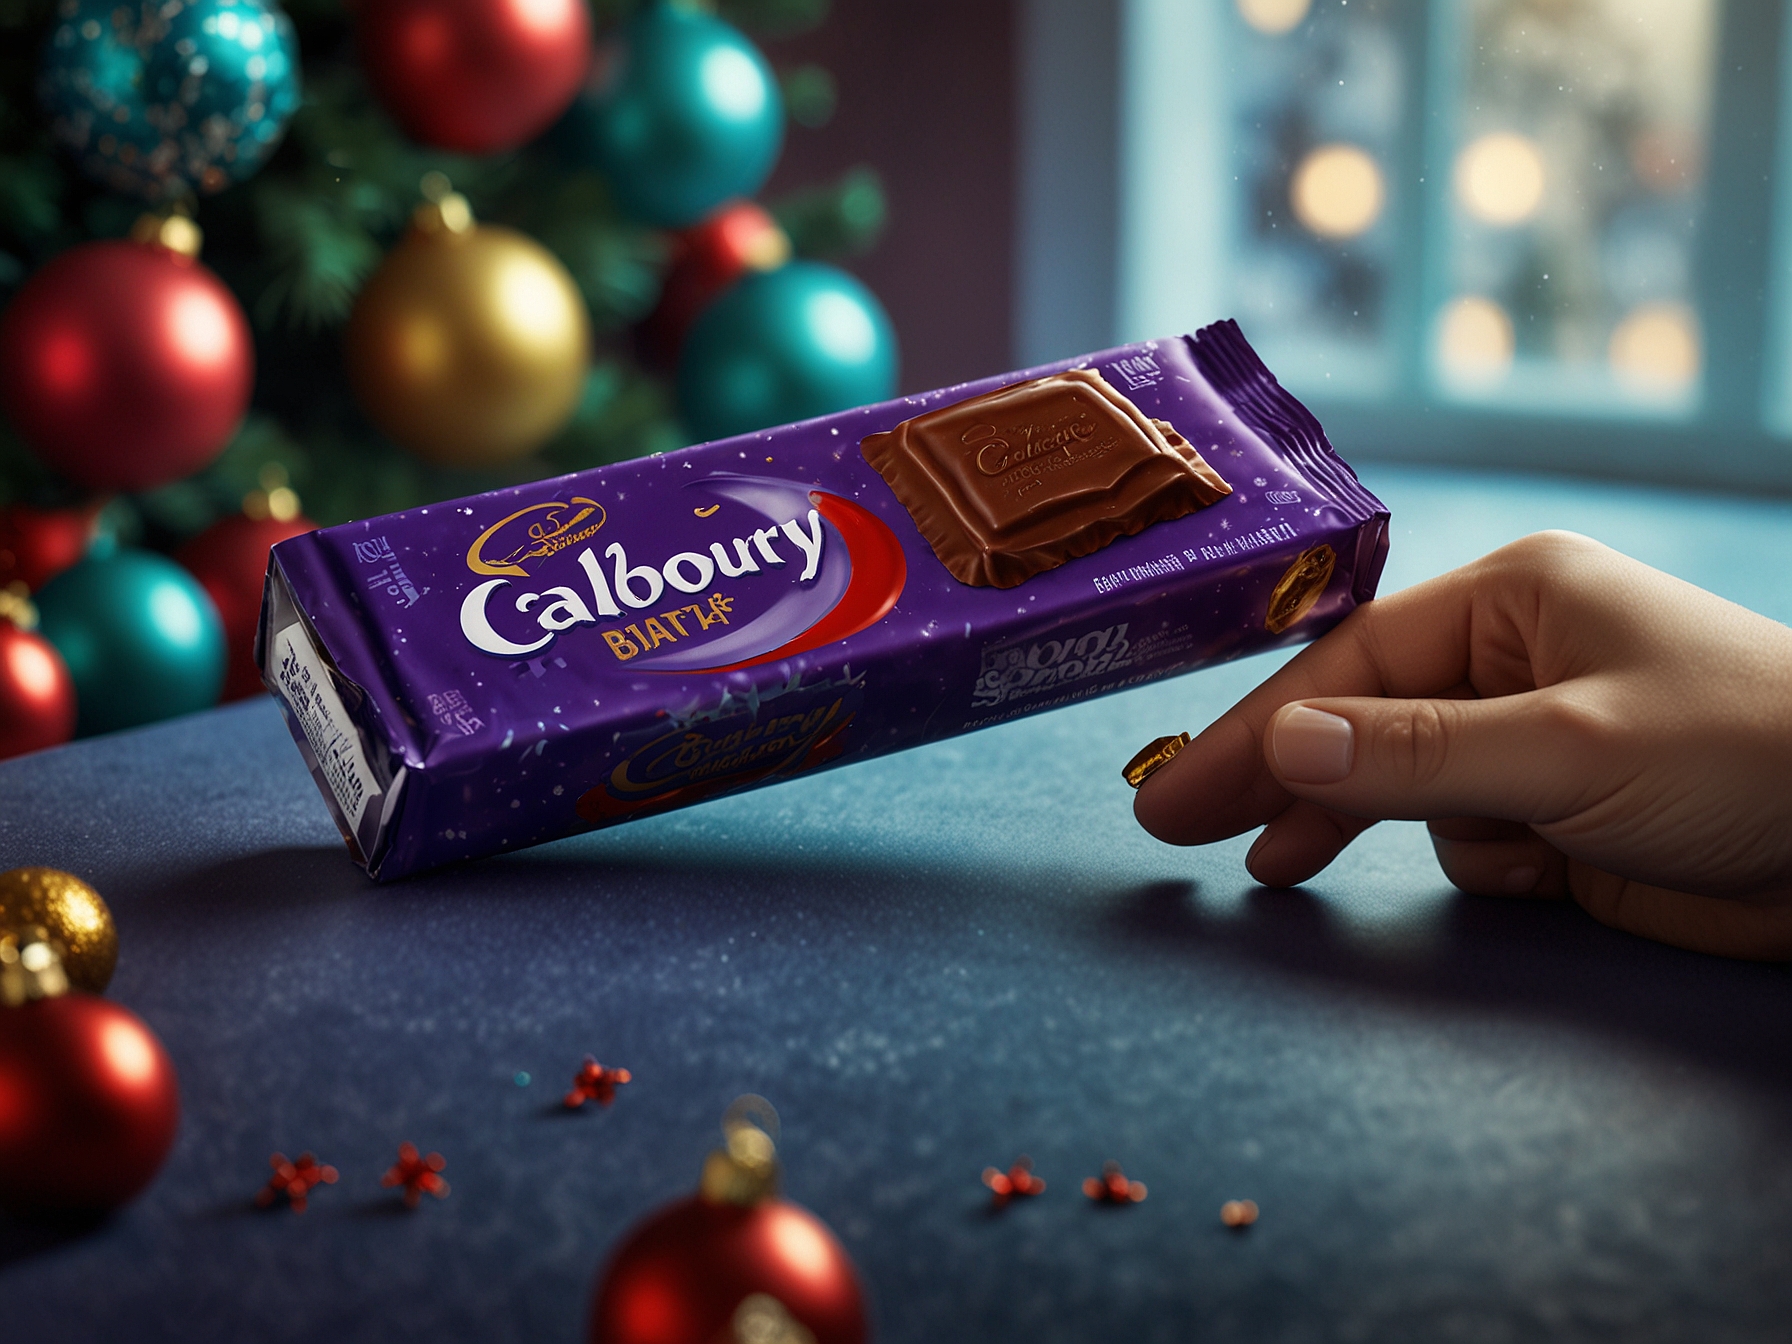 Close-up of the unwrapped 'dog-sized' Cadbury chocolate bar next to holiday decorations, emphasizing its large size and appeal as a festive gift option.